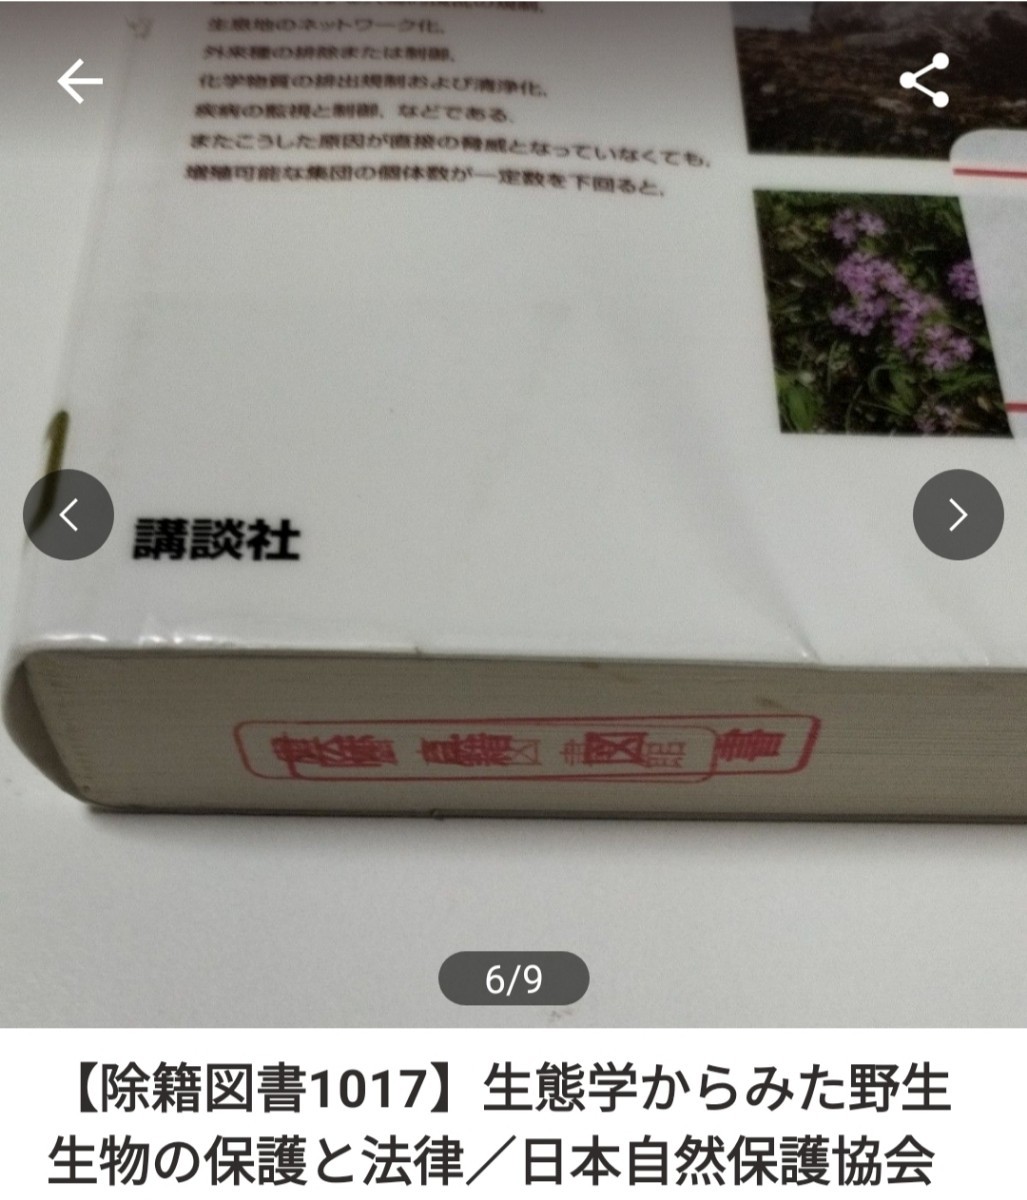 [ library except .book@N1] raw .. from ... raw living thing. protection . law | Japan nature protection association ( library recycle book@N1)( except . books N1)